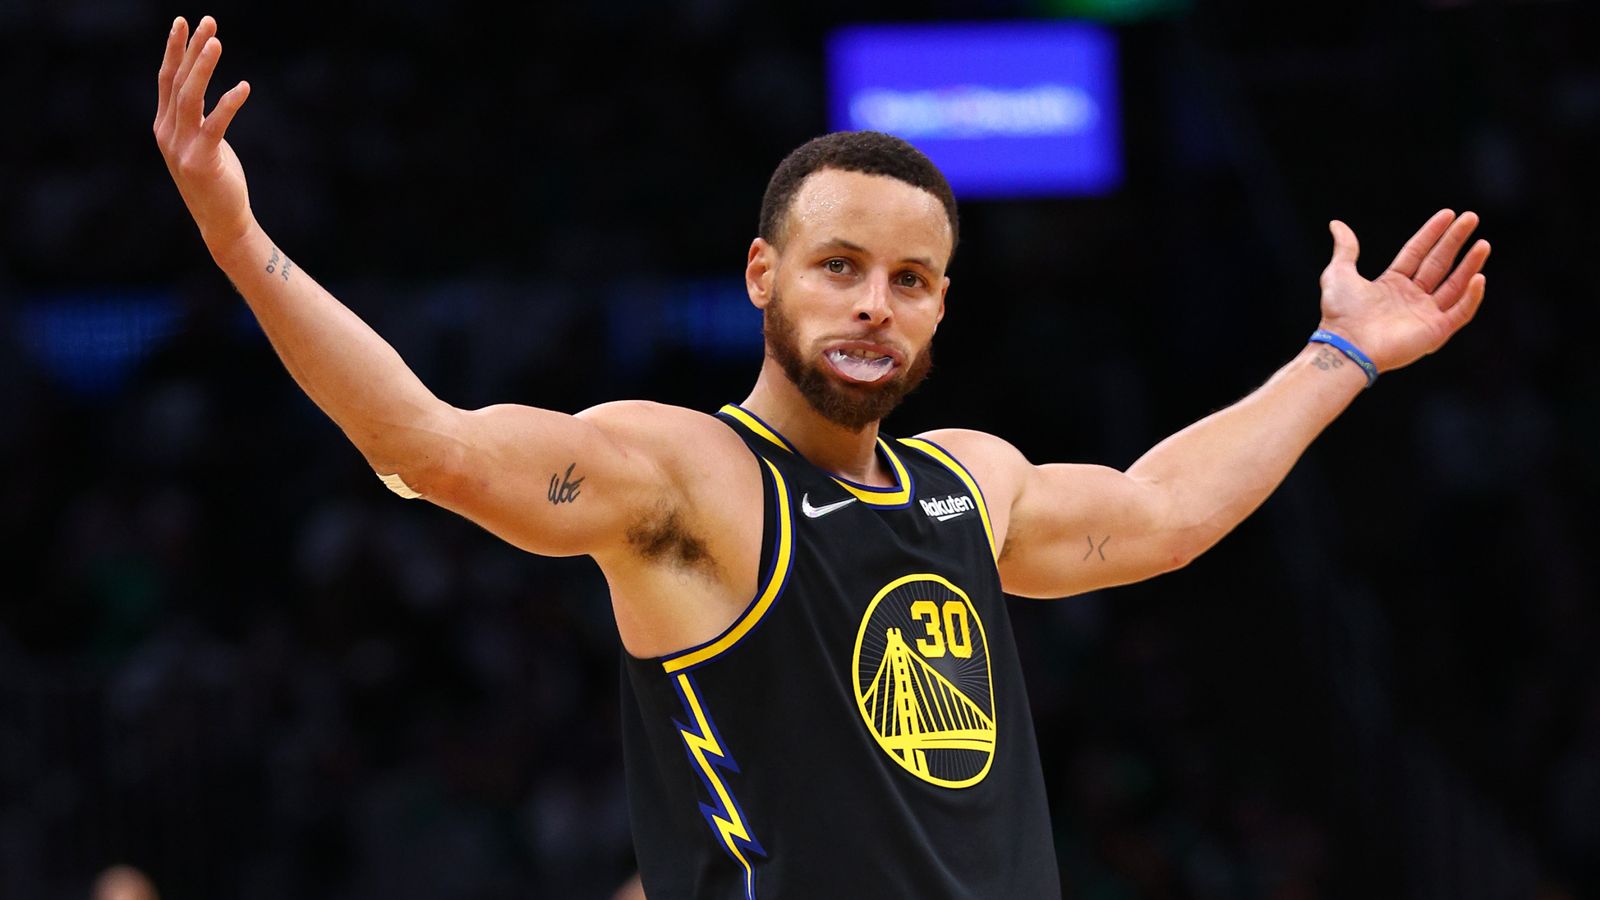 NBA Finals: Stephen Curry produces heroic 43-point display as Golden State Warriors level series